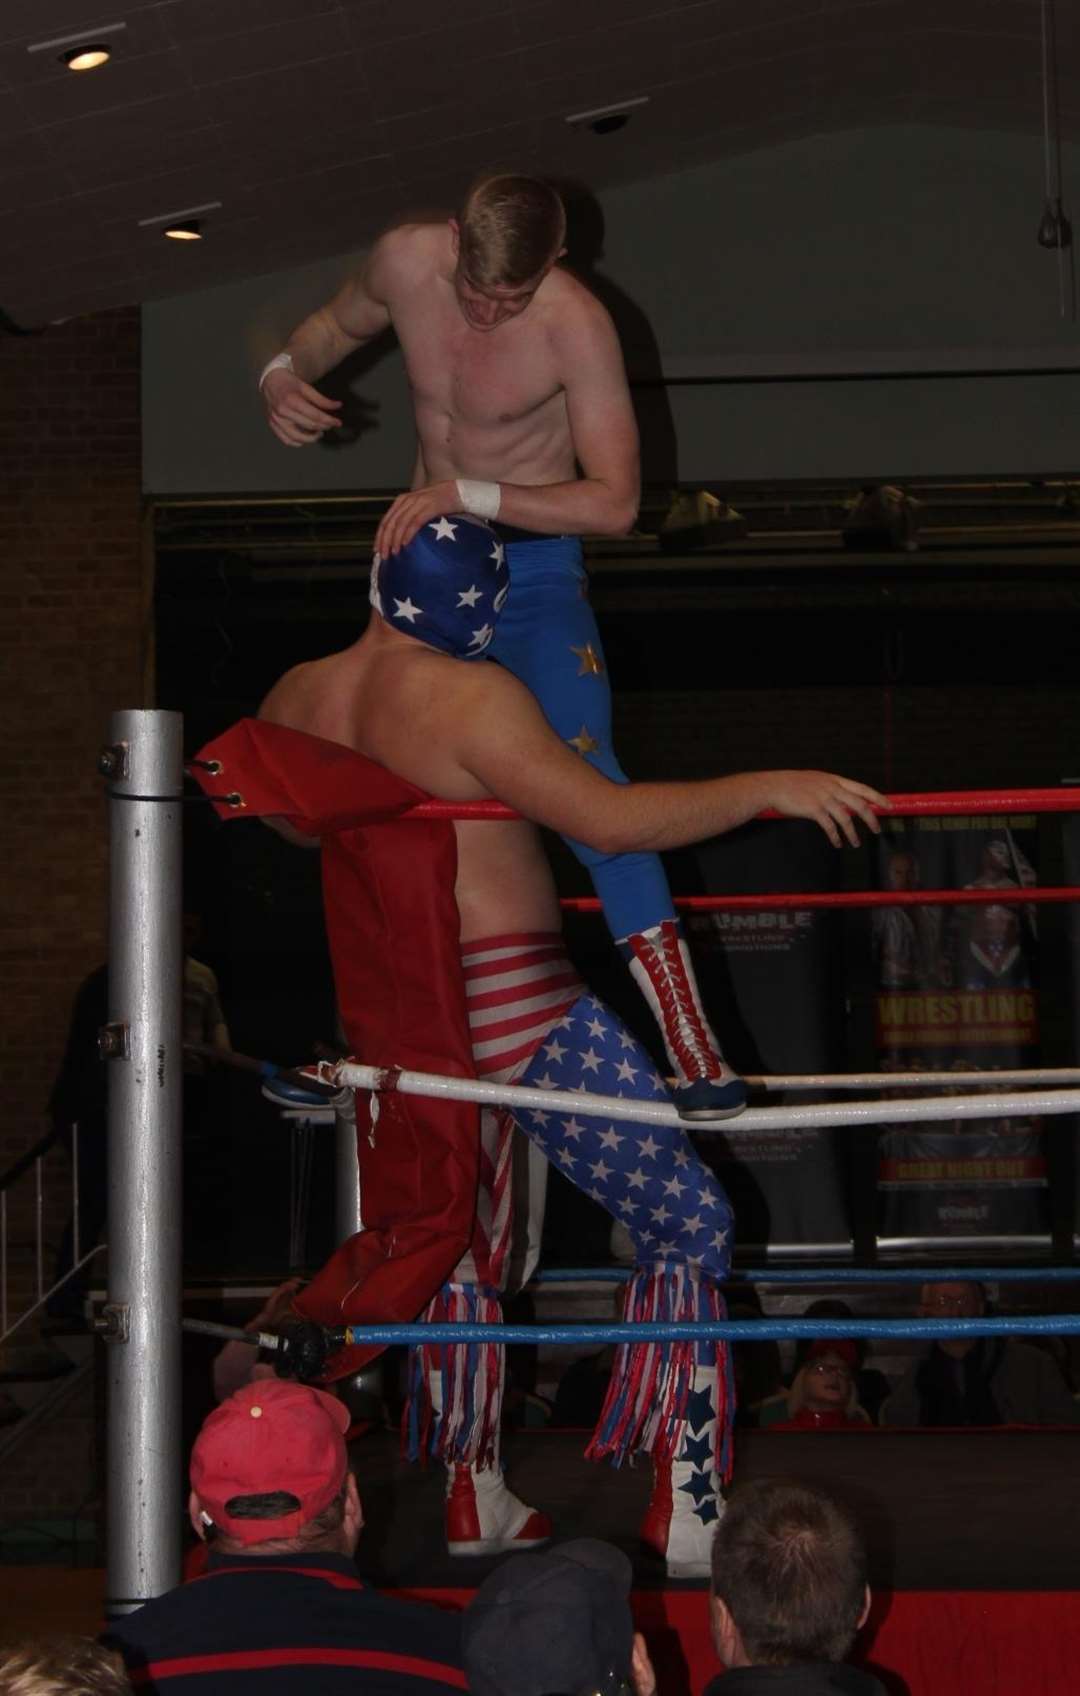 Syd Manelli gives Mr USA a pounding in the final of Rumble Wrestling's championship bout at Kemsley village hall (6296677)